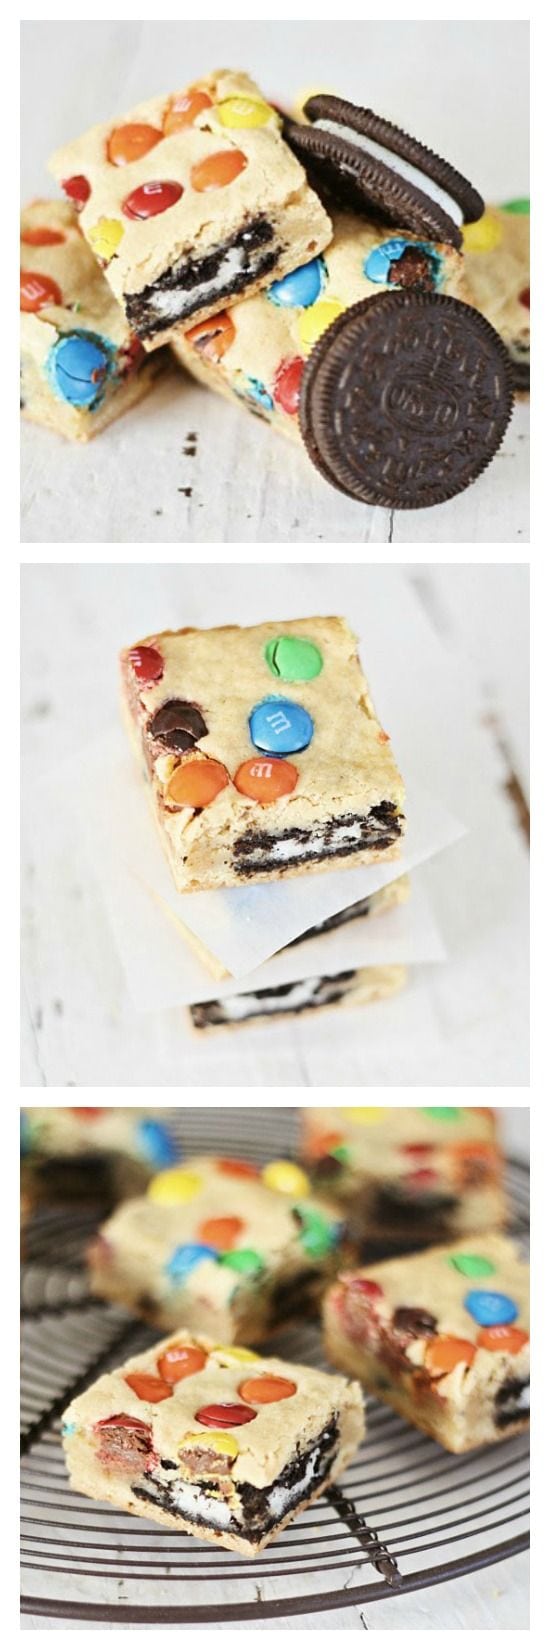 Loaded M&M's and Oreo Cookies Bars, crazy addictive with all your favorites in one bite. Make them today! | rasamalaysia.com